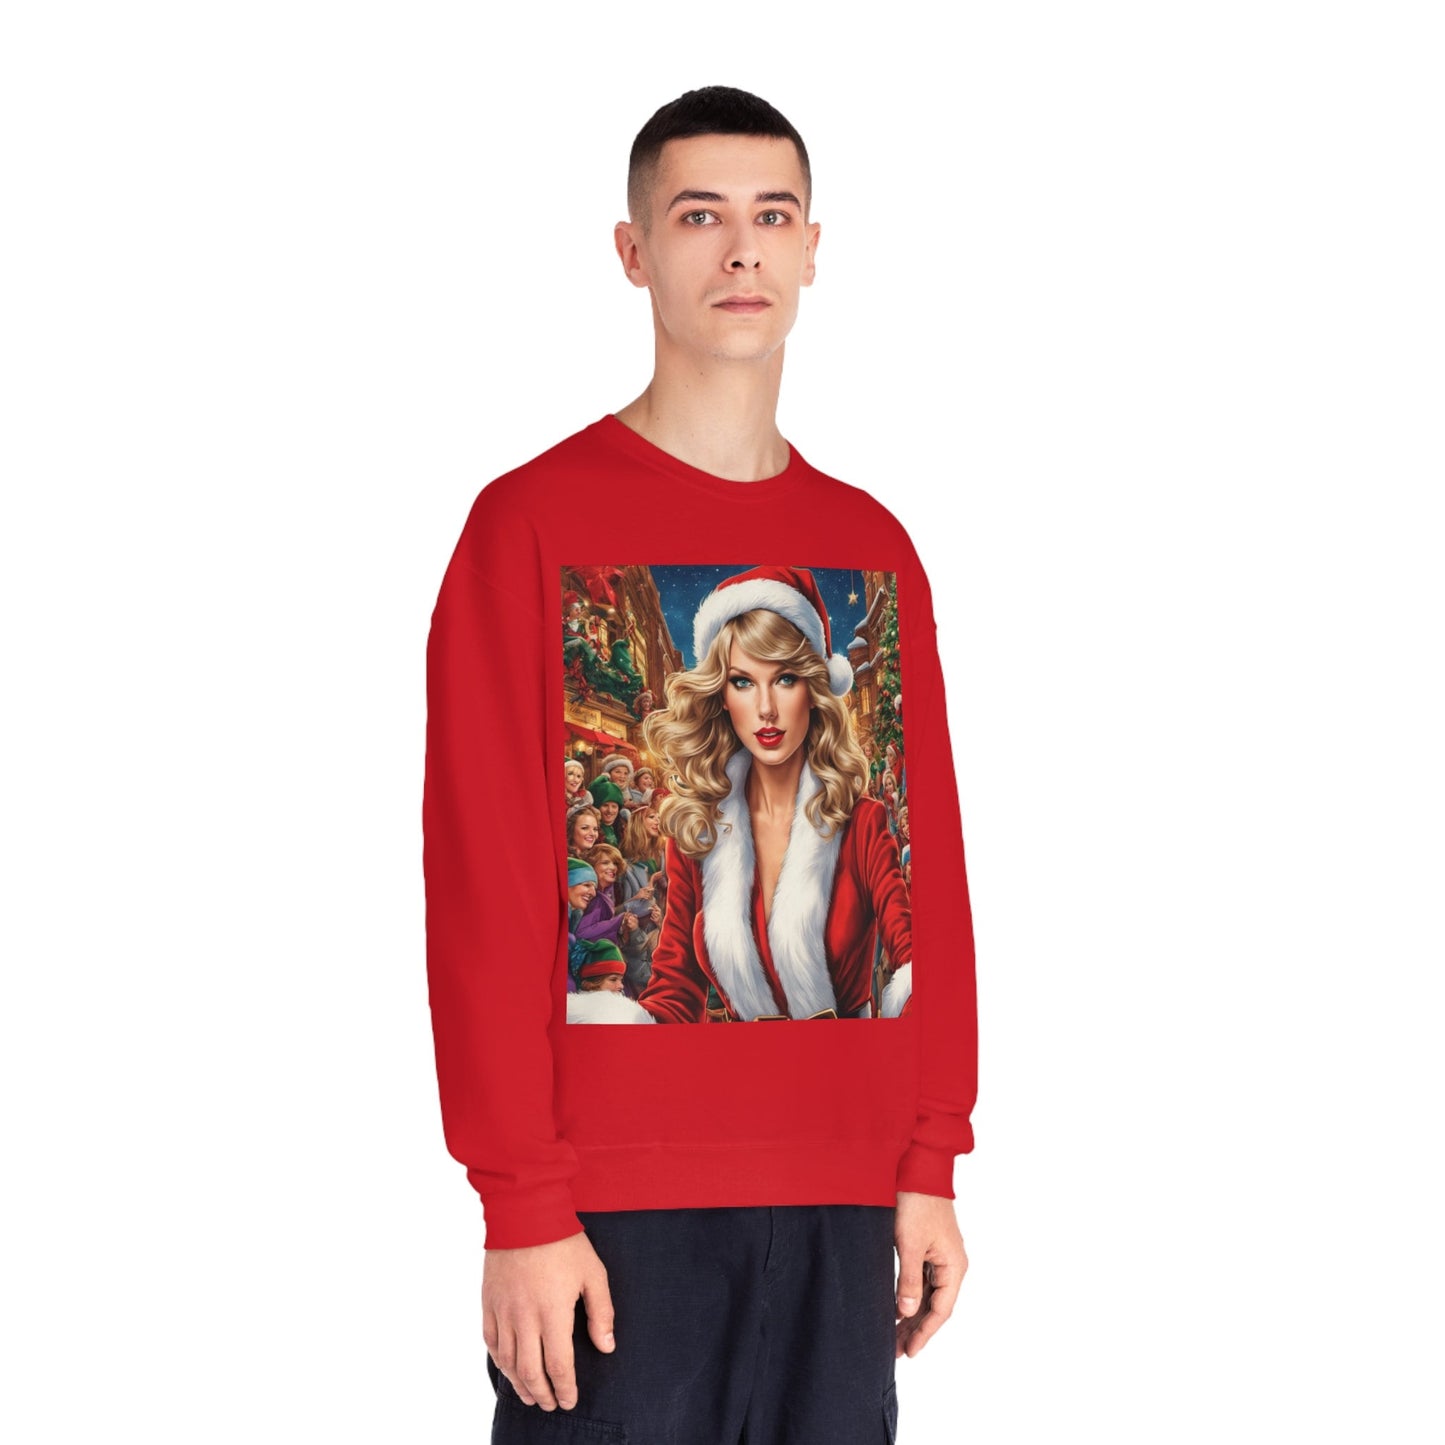 Ugly Swiftmas Sweater Perfect for Christmas Gift for Swiftie Men/Women